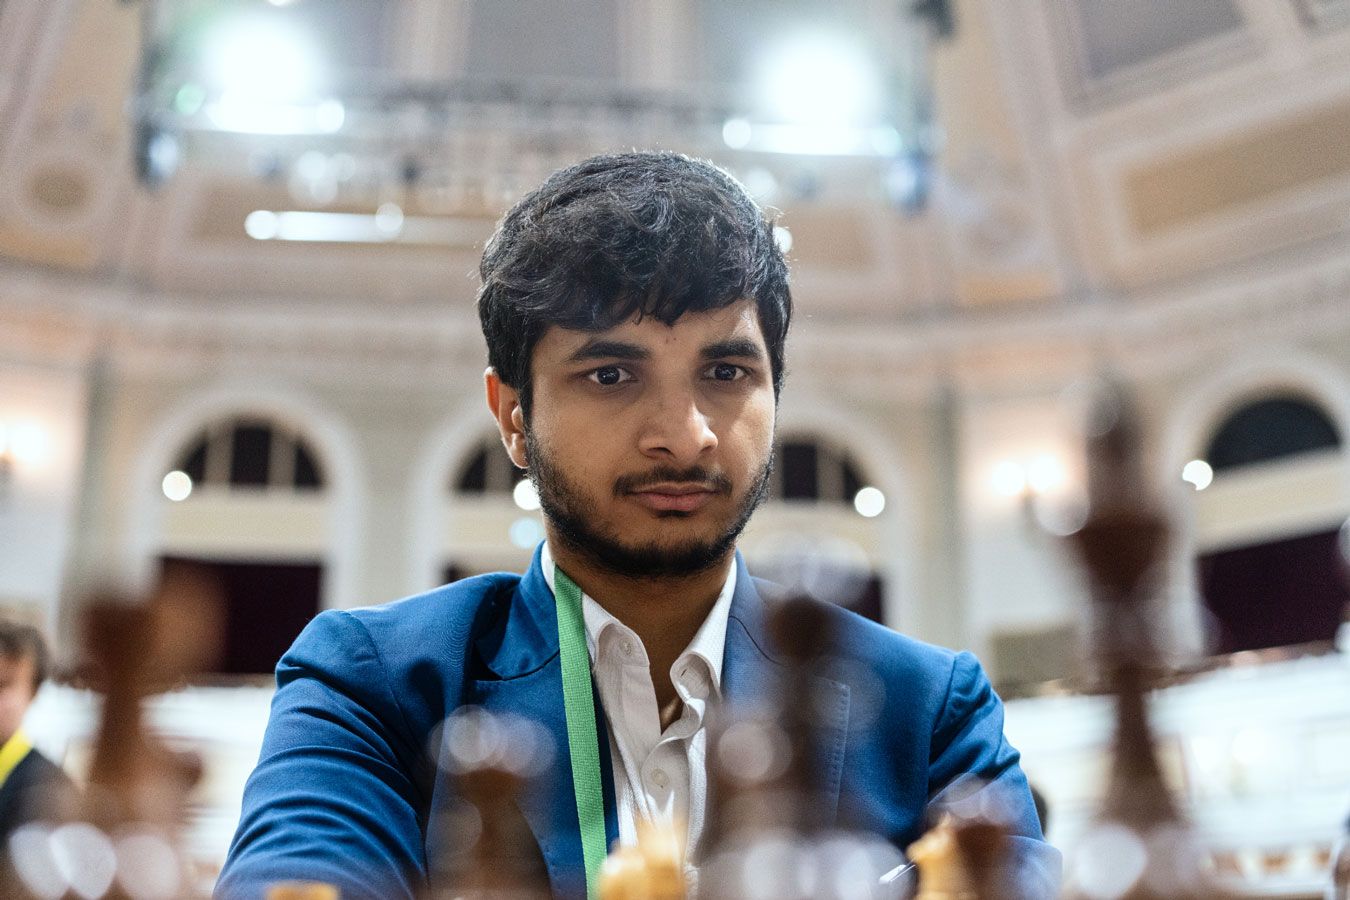 Vidit is not expected by Carlsen to do well in Toronto, but can he surprise? Photo: Maria Emelianova/Chess.com